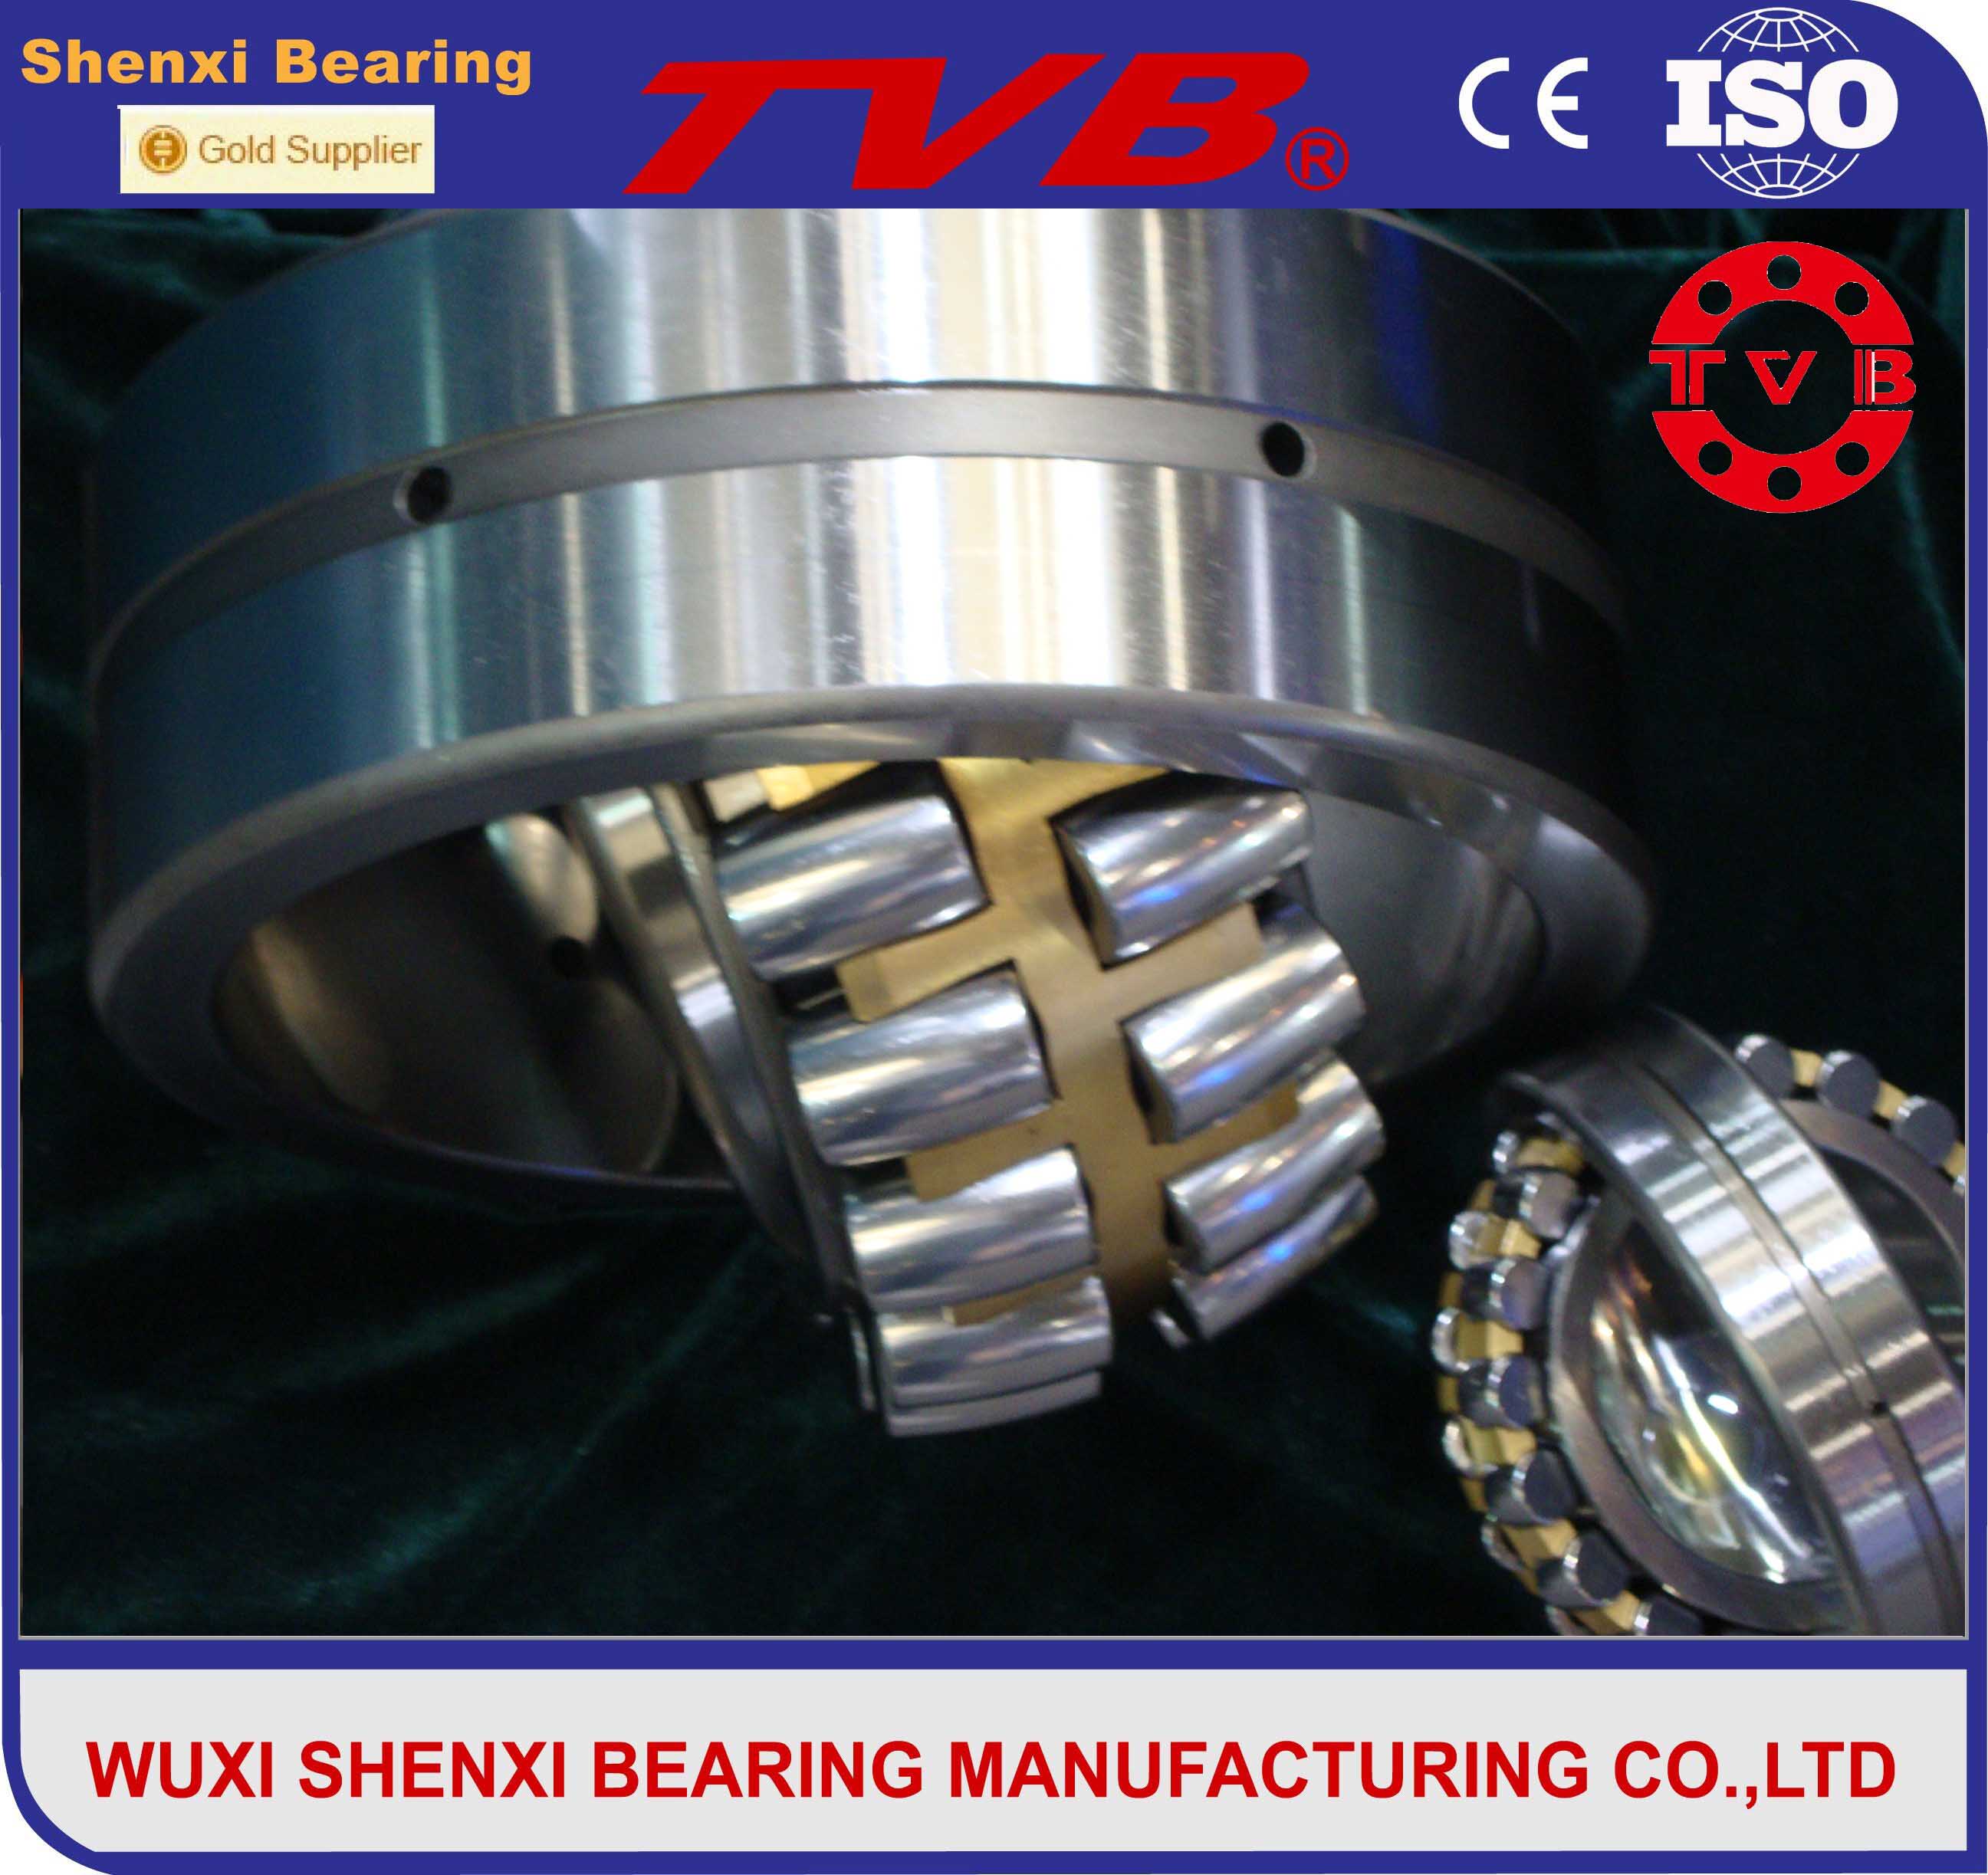 230/500CC/W33 Steel Gasoline Engine Spherical Roller Bearing with P5 Precision